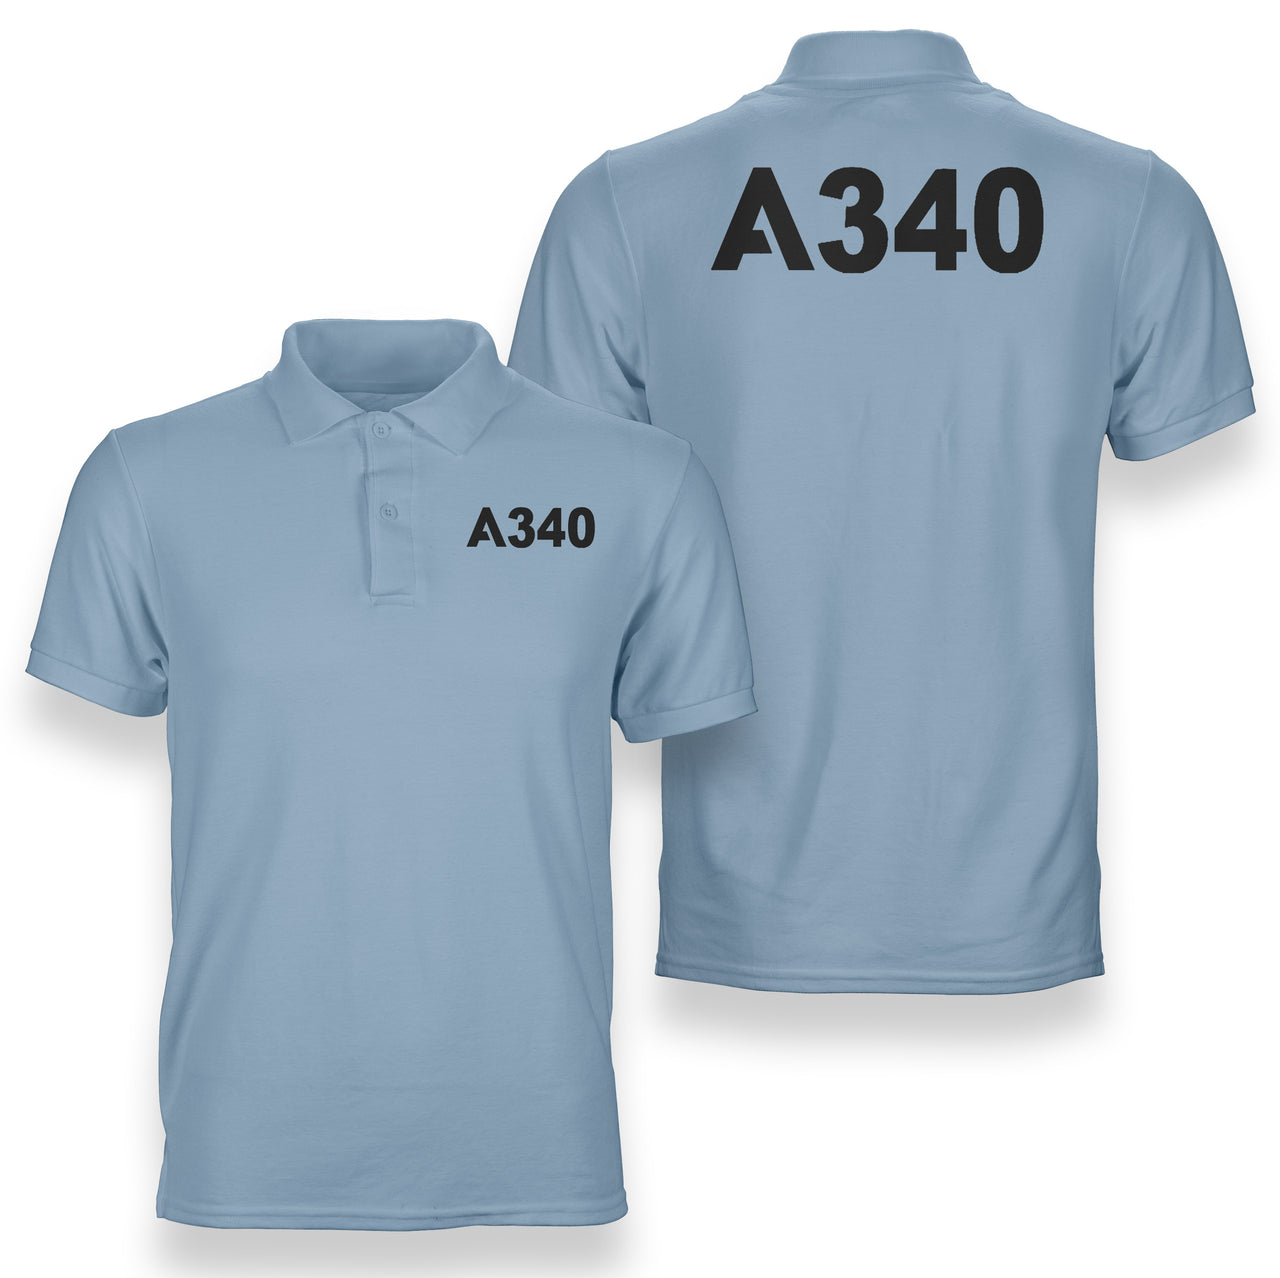 A340 Flat Text Designed Double Side Polo T-Shirts